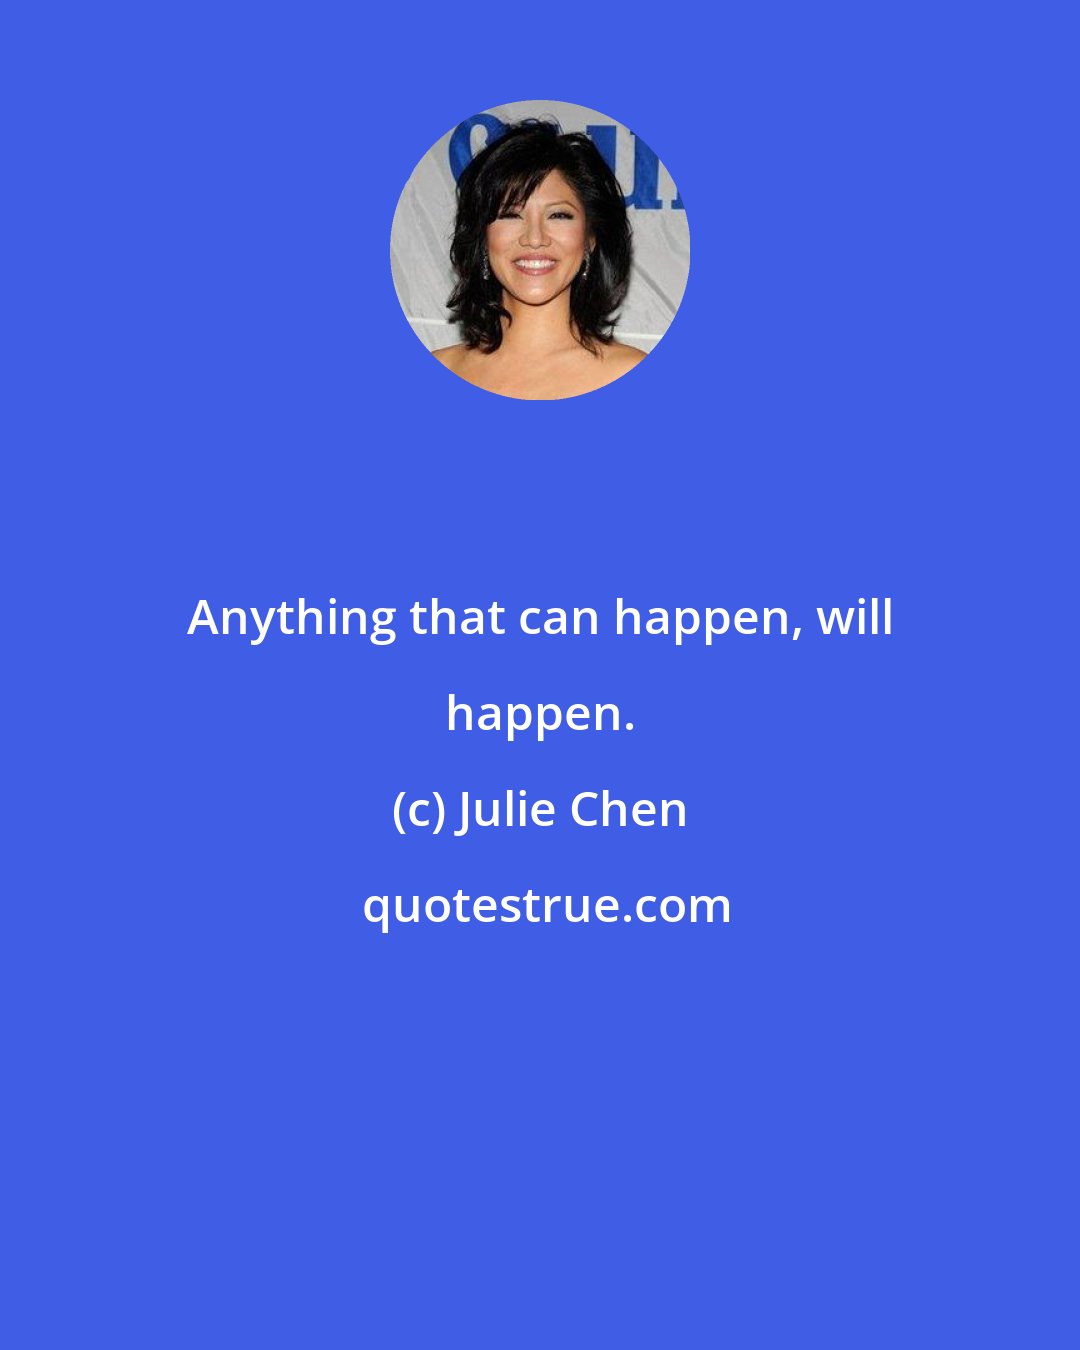 Julie Chen: Anything that can happen, will happen.